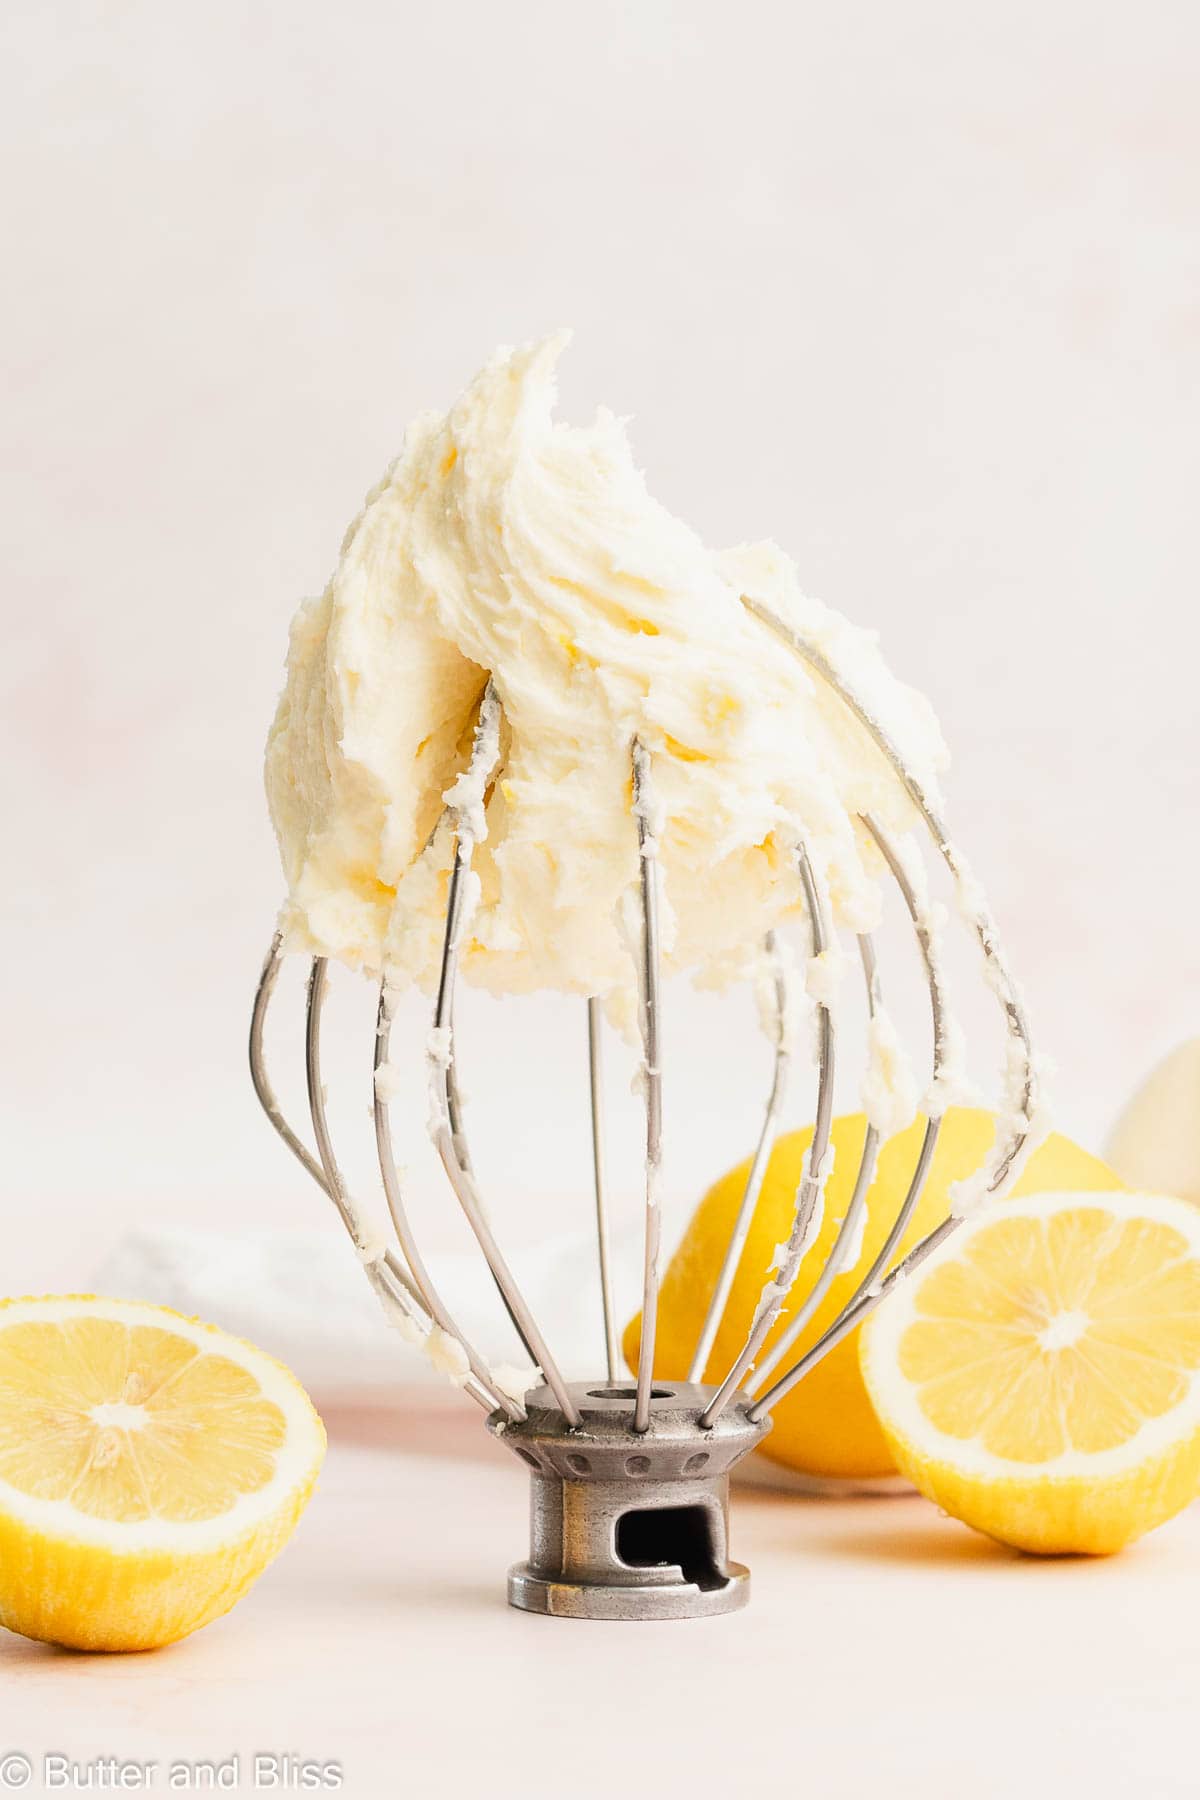 Fluffy lemon buttercream frosting on a mixer whisk arranged on a table with lemons.